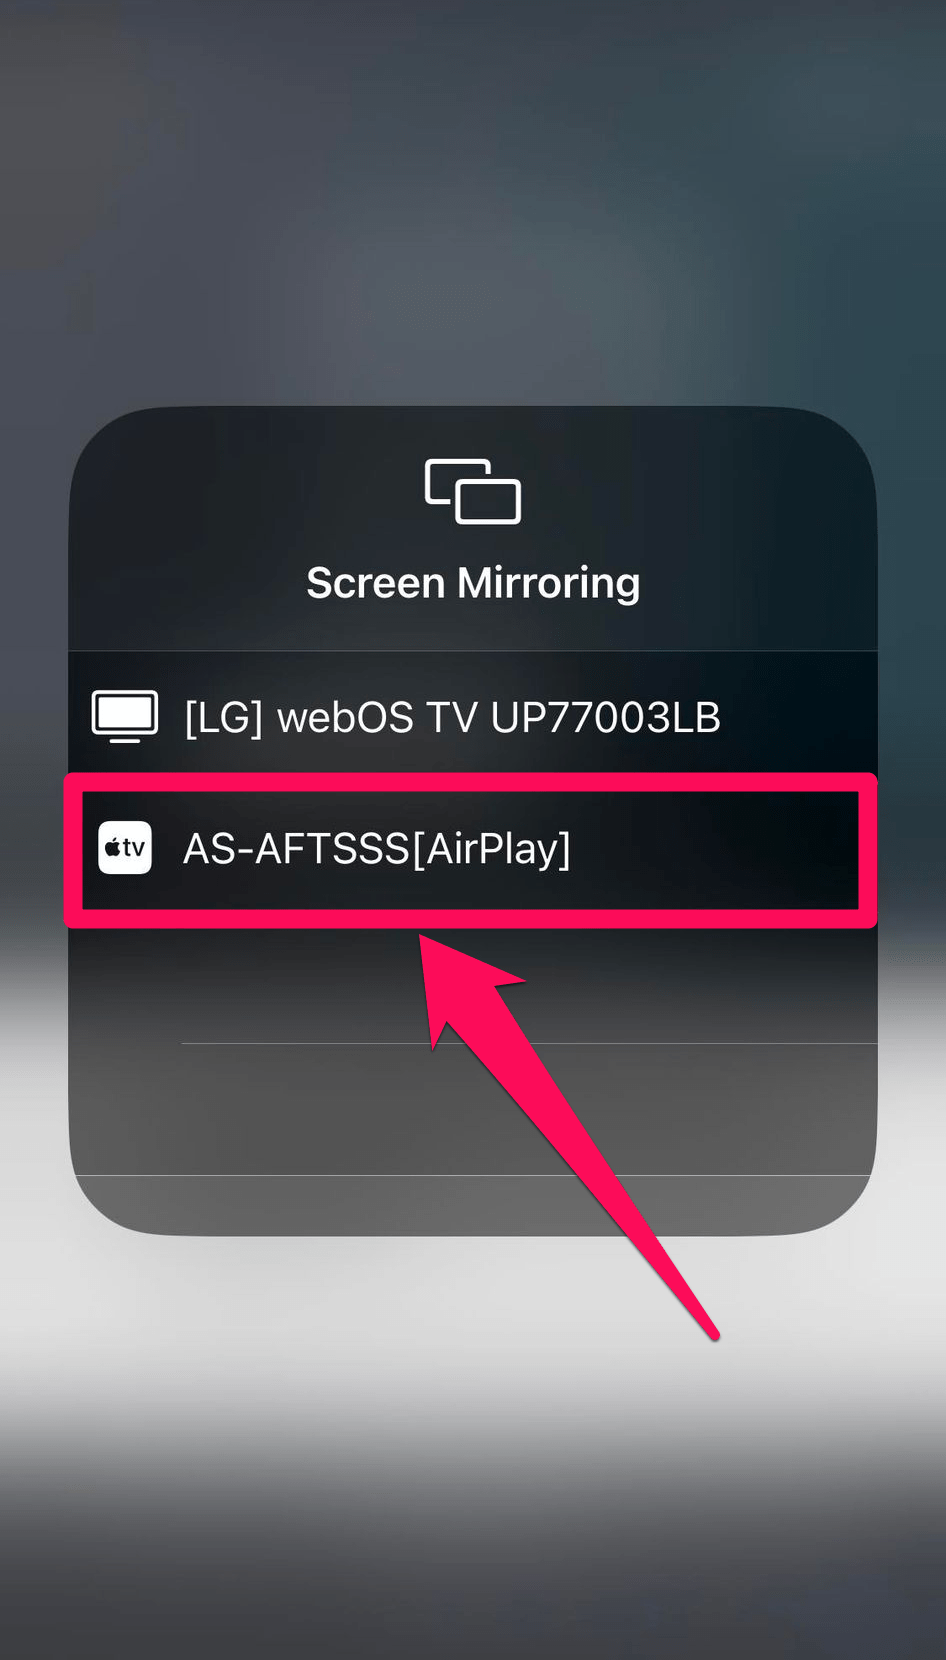 Select your AirPlay device from the list